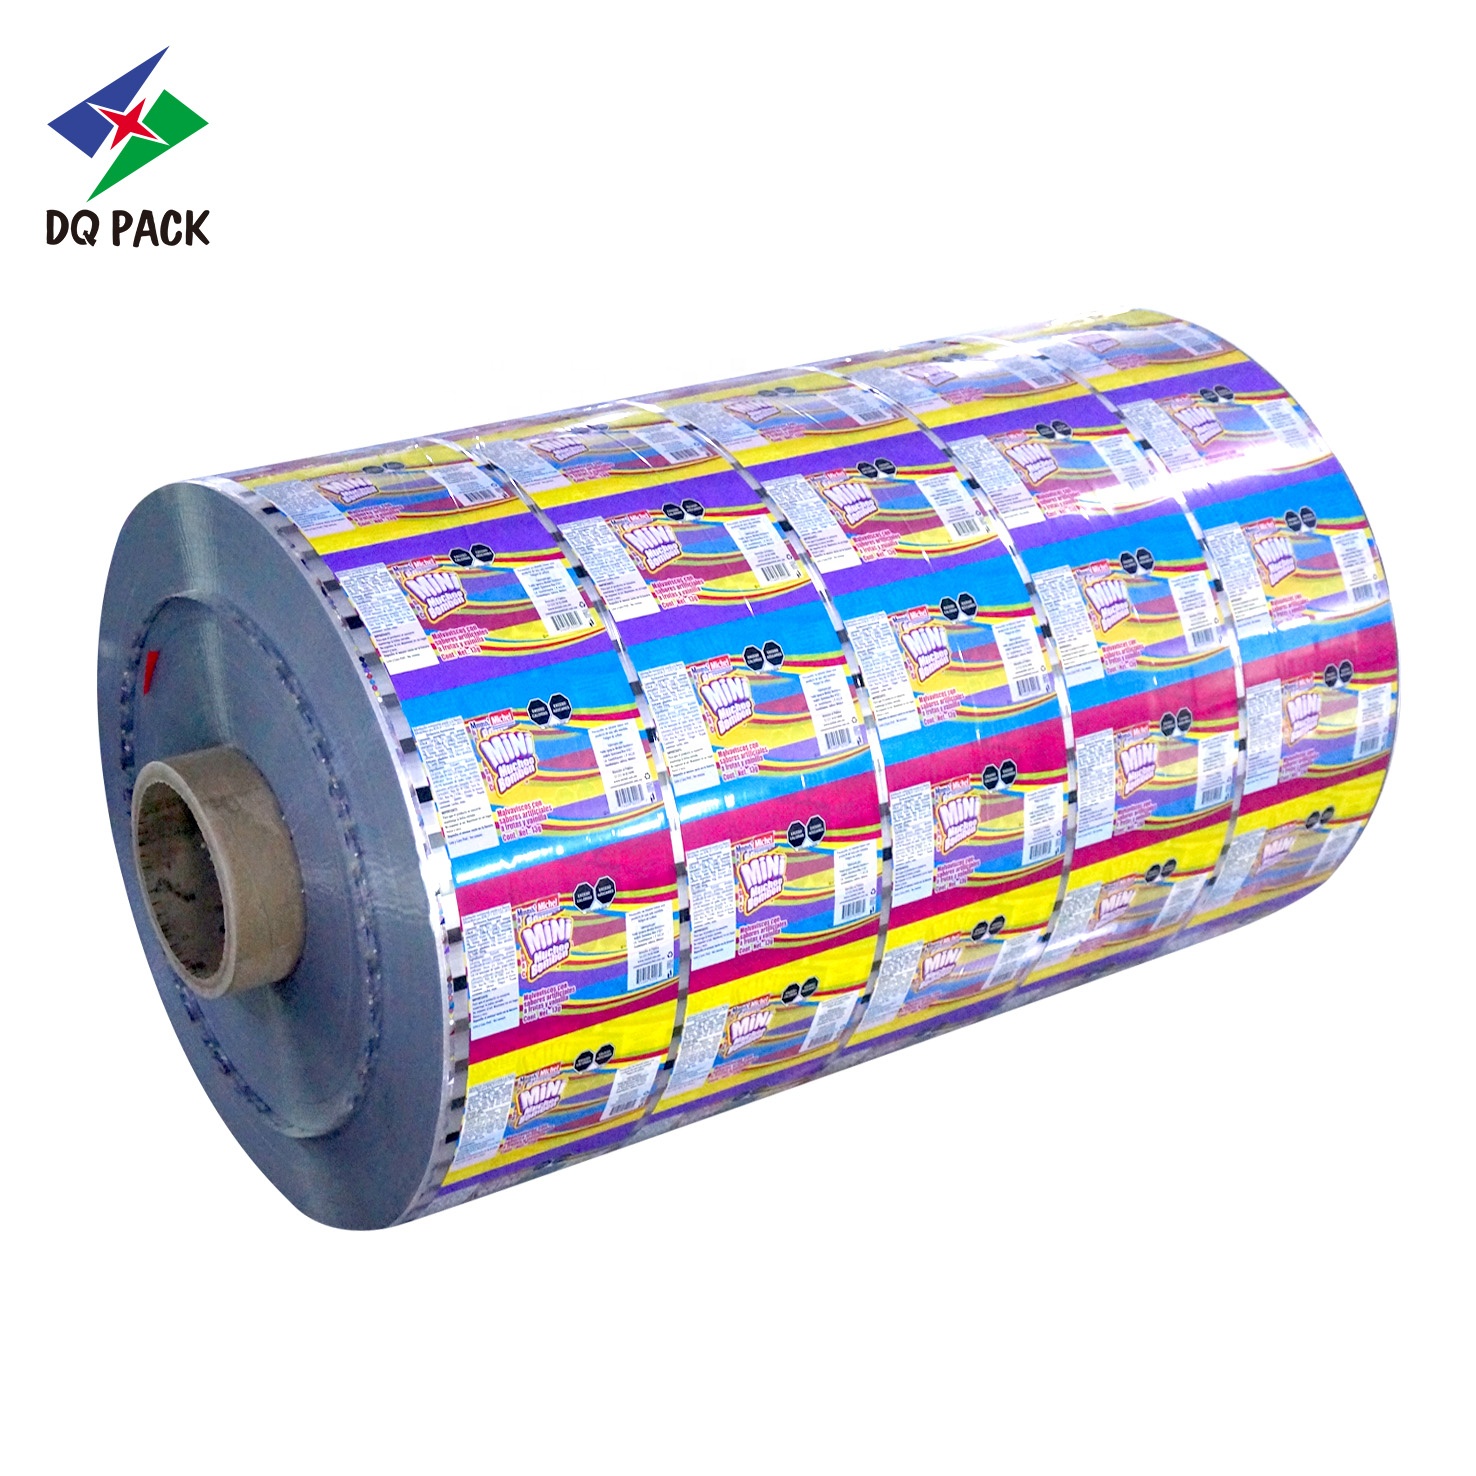 DQ PACK Printed High Barrier Roll Film Snack packaging film